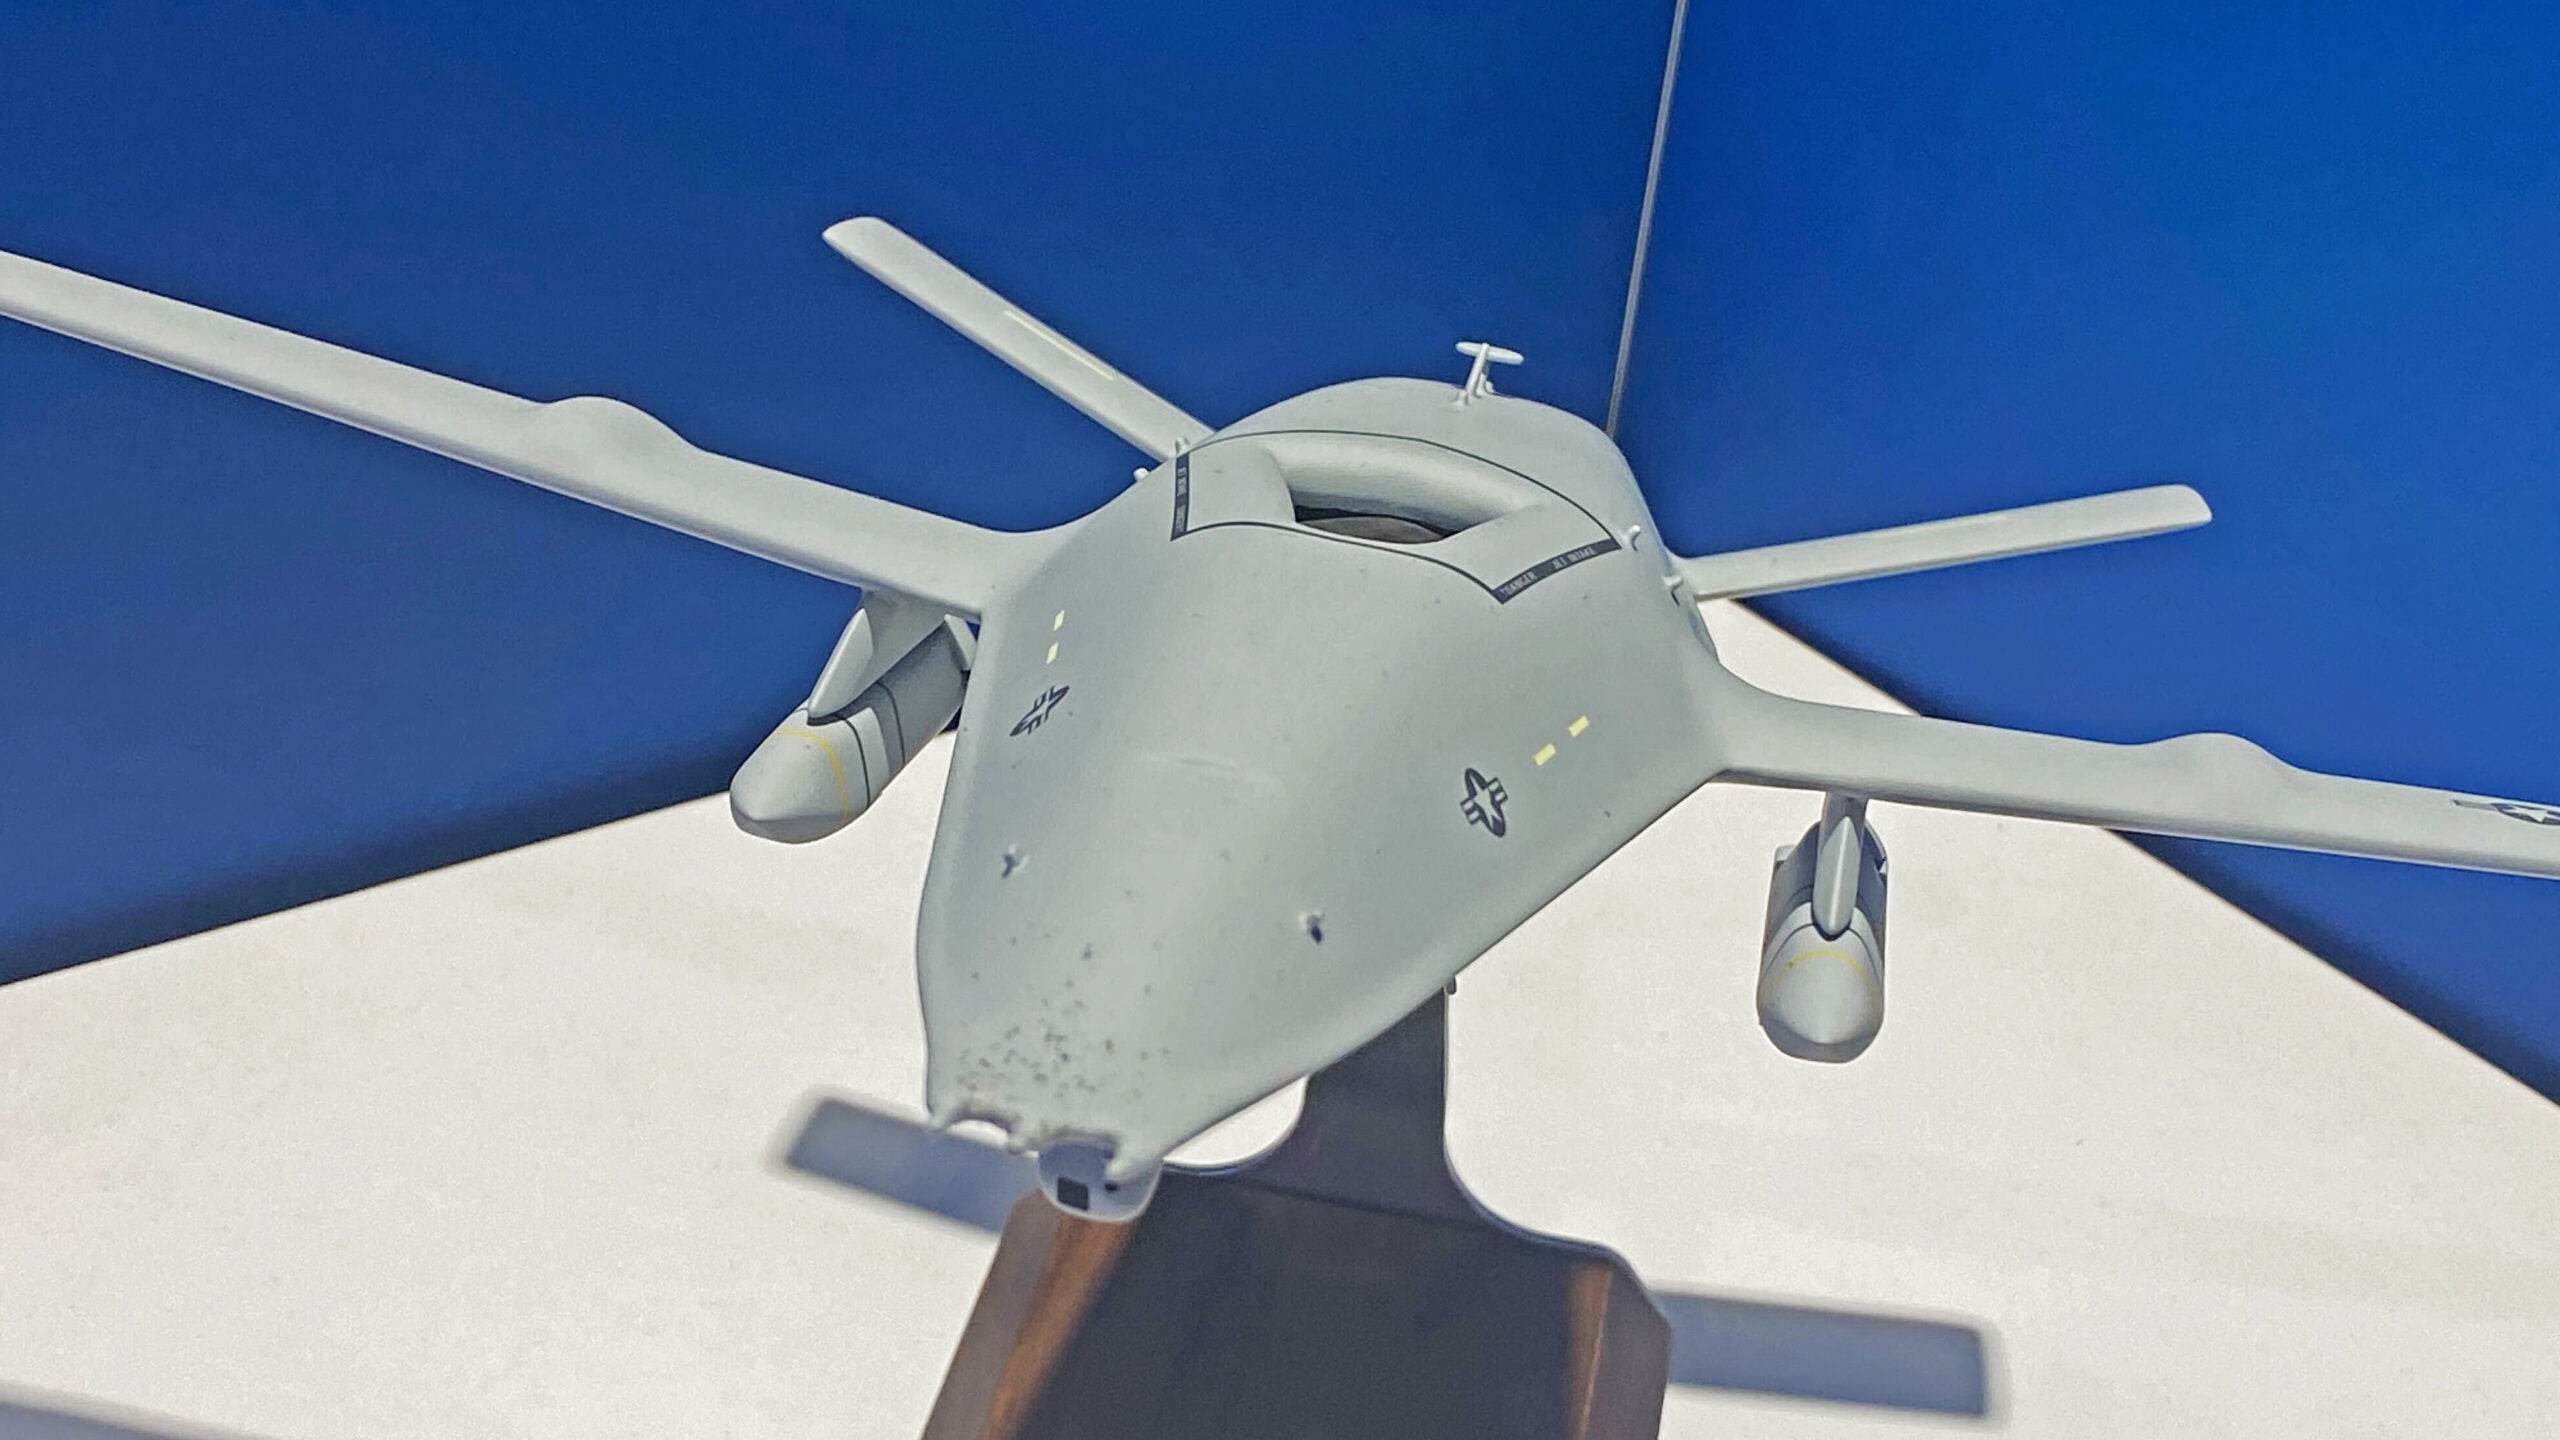 Boeing has displayed a model of its MQ-25 Stingray carrier-based tanker drone armed with a pair of stealthy Lockheed Martin AGM-158C Long-Range Anti-Surface Missiles (LRASM).